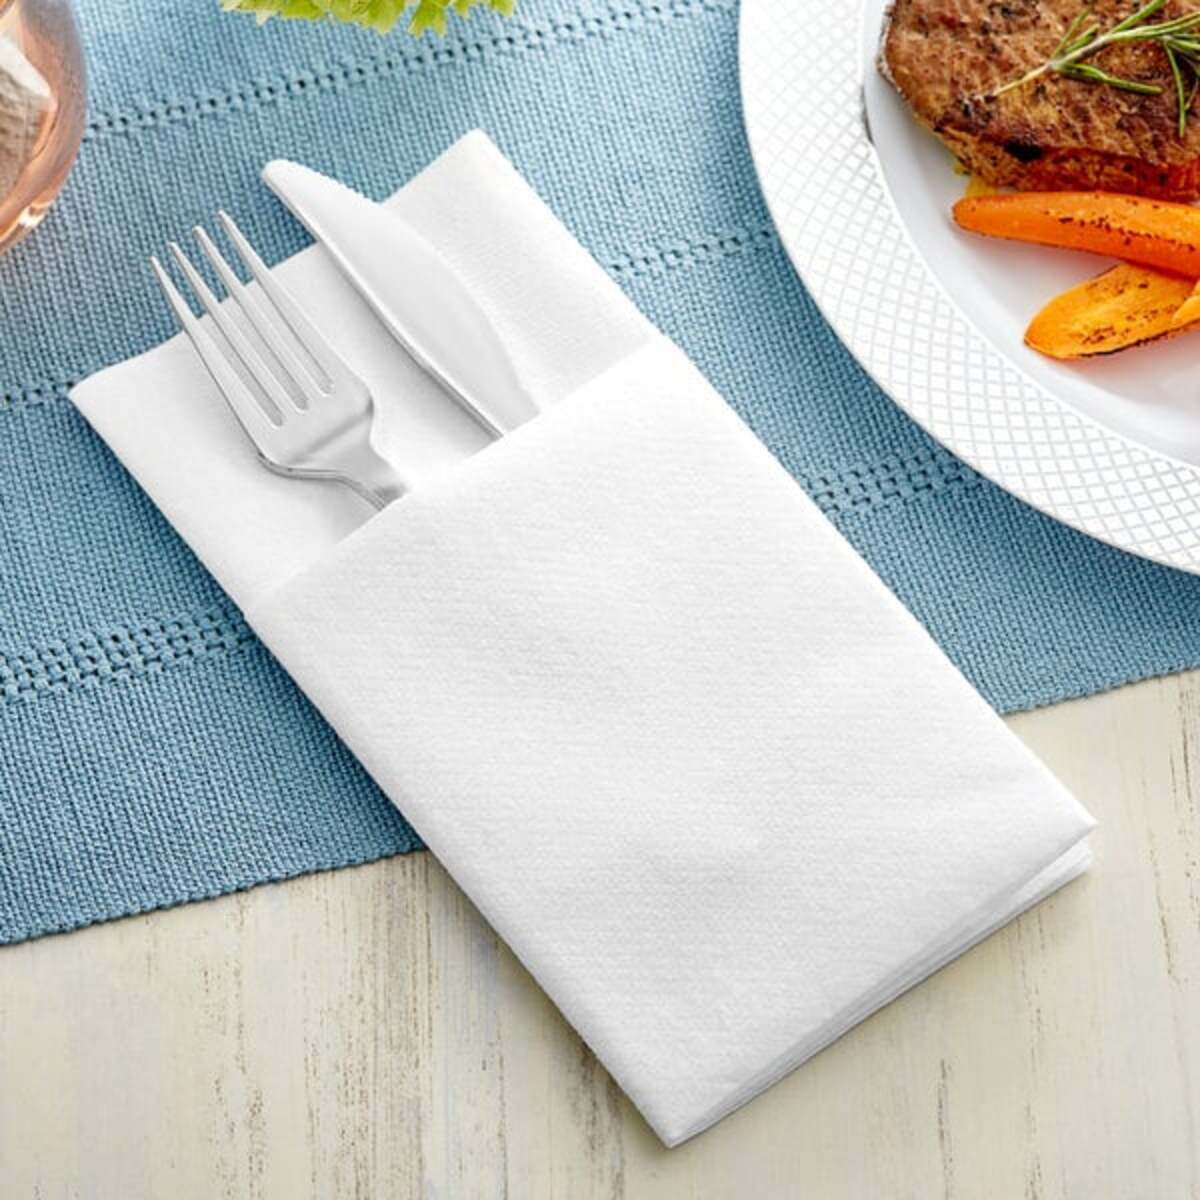 How To Wrap Silverware In Paper Napkins